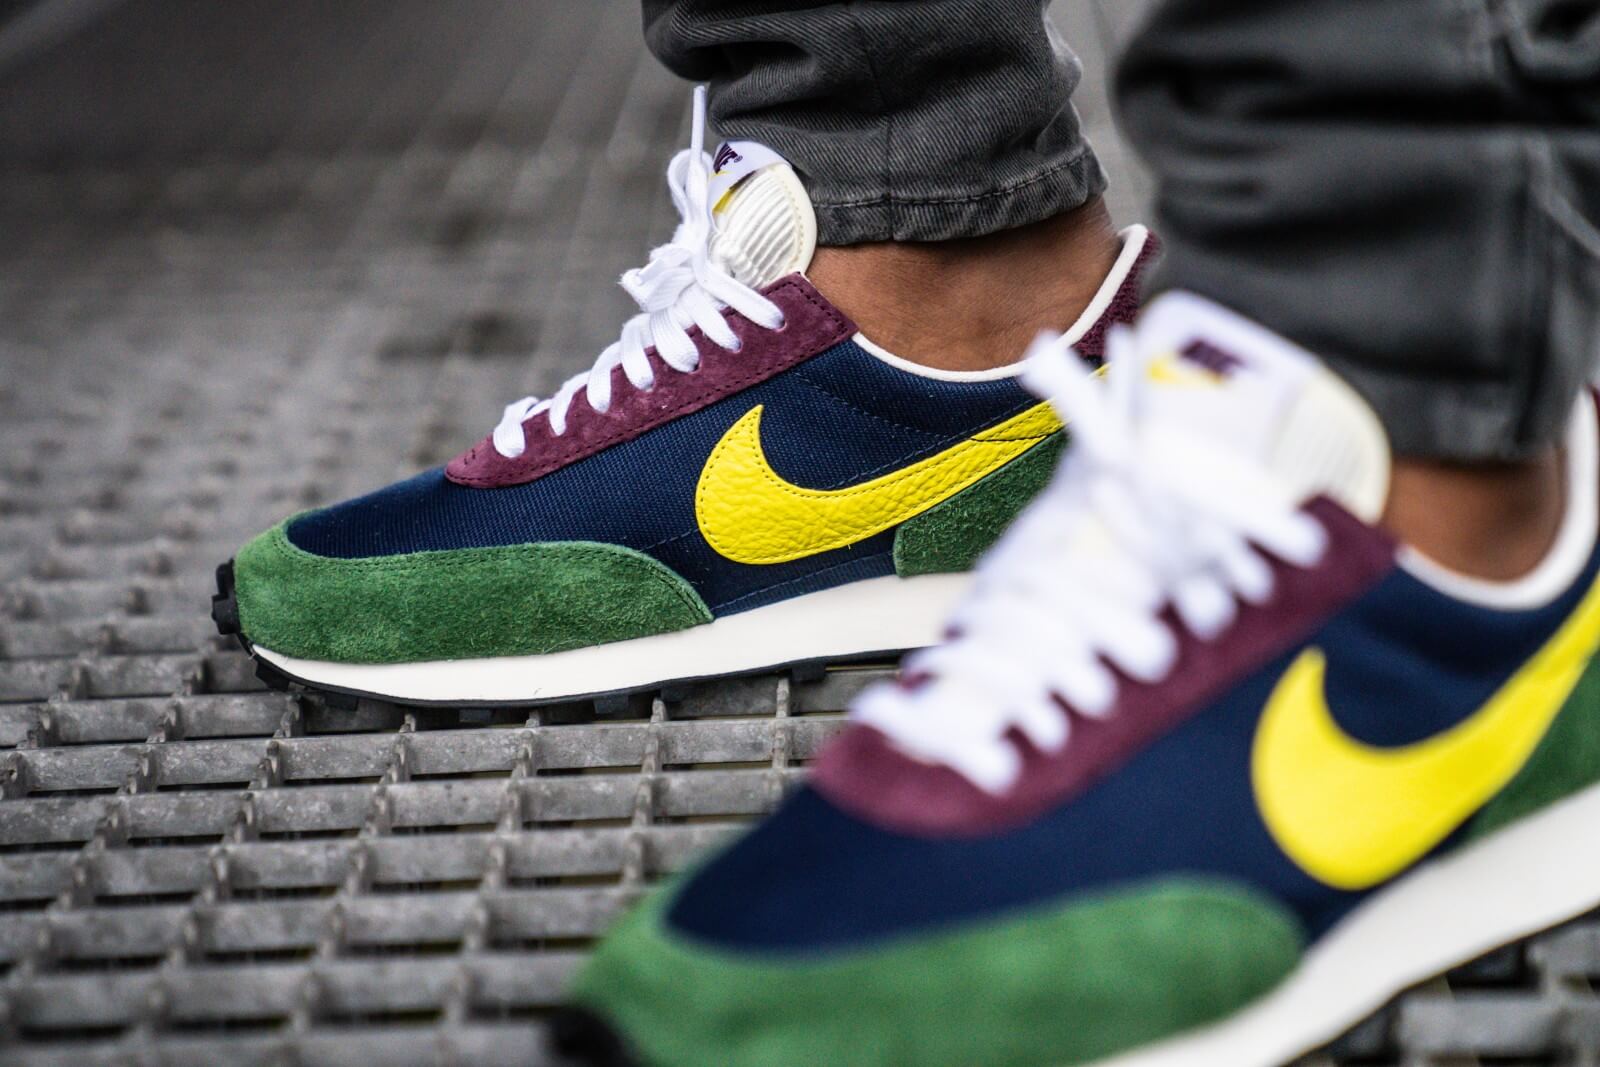 havik Voorlopige naam Jumping jack Kicks Deals Canada Twitter'da: "Add some craziness to your rotation with  this fantastic new multi-material "Cosmic Bonsai" colourway of the classic Nike  Daybreak that can now be had from Nike CA for